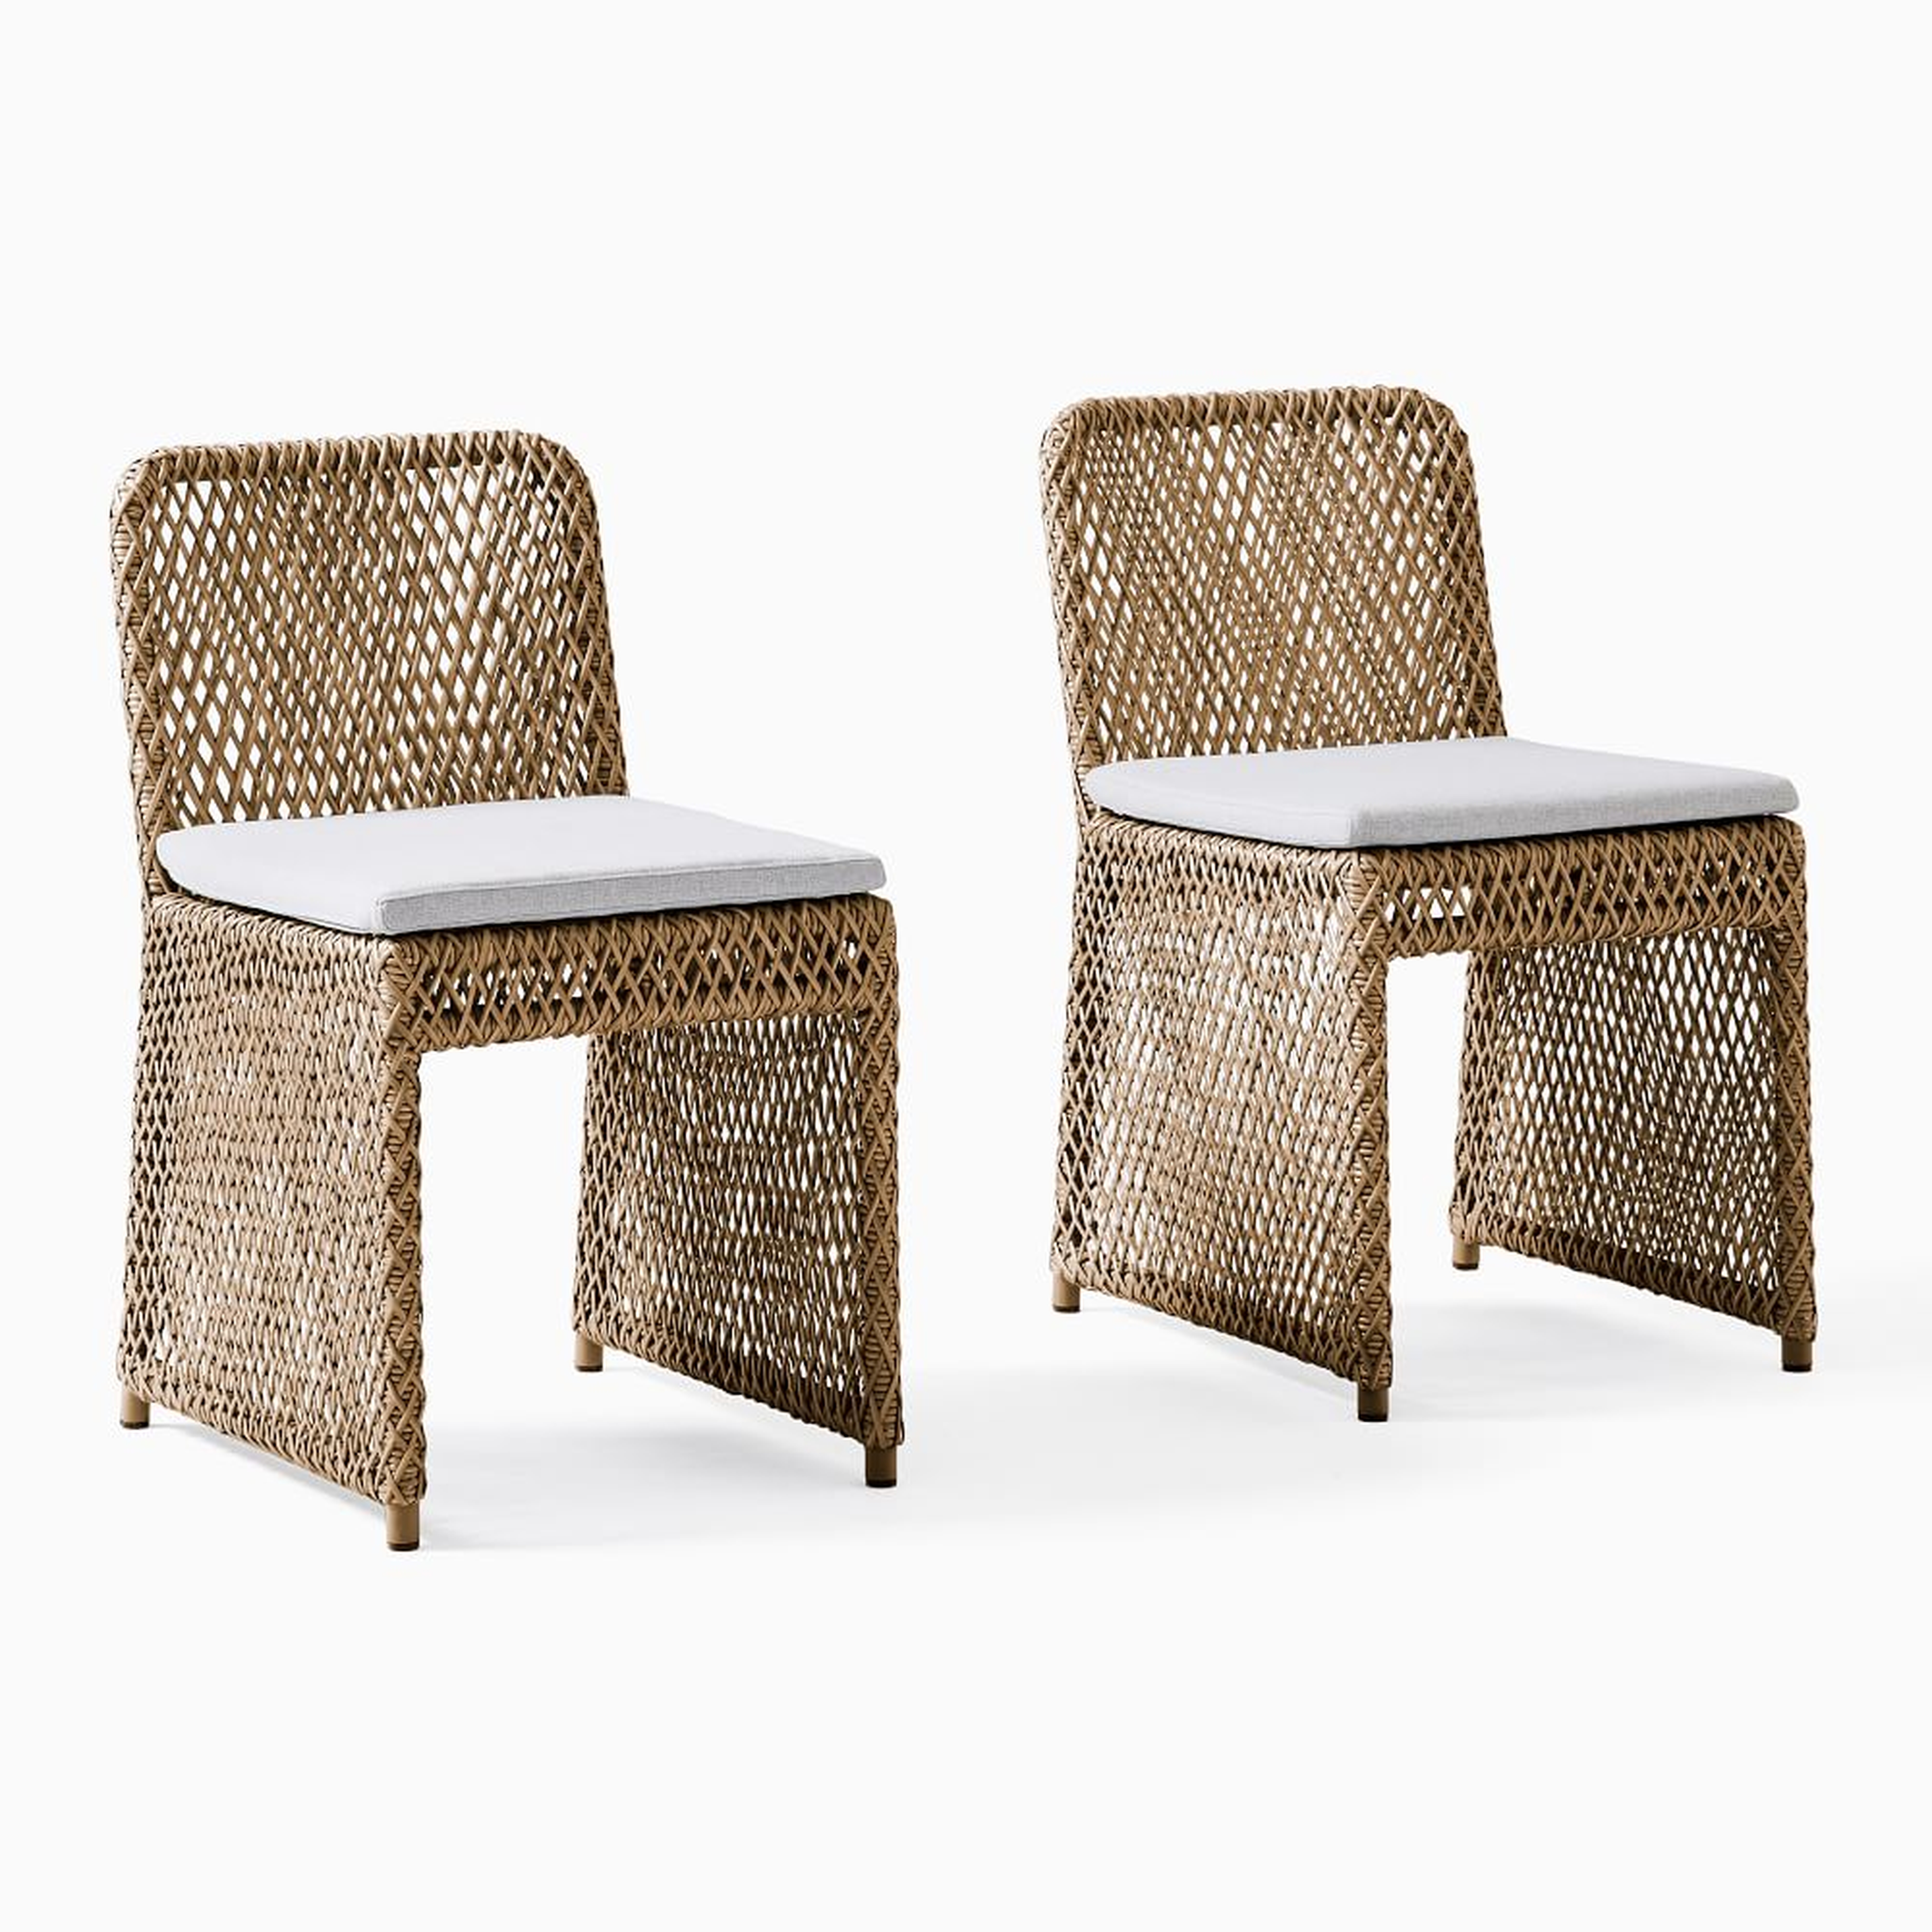 Coastal Dining Chair, Set of 2, All Weather Wicker, Natural - West Elm